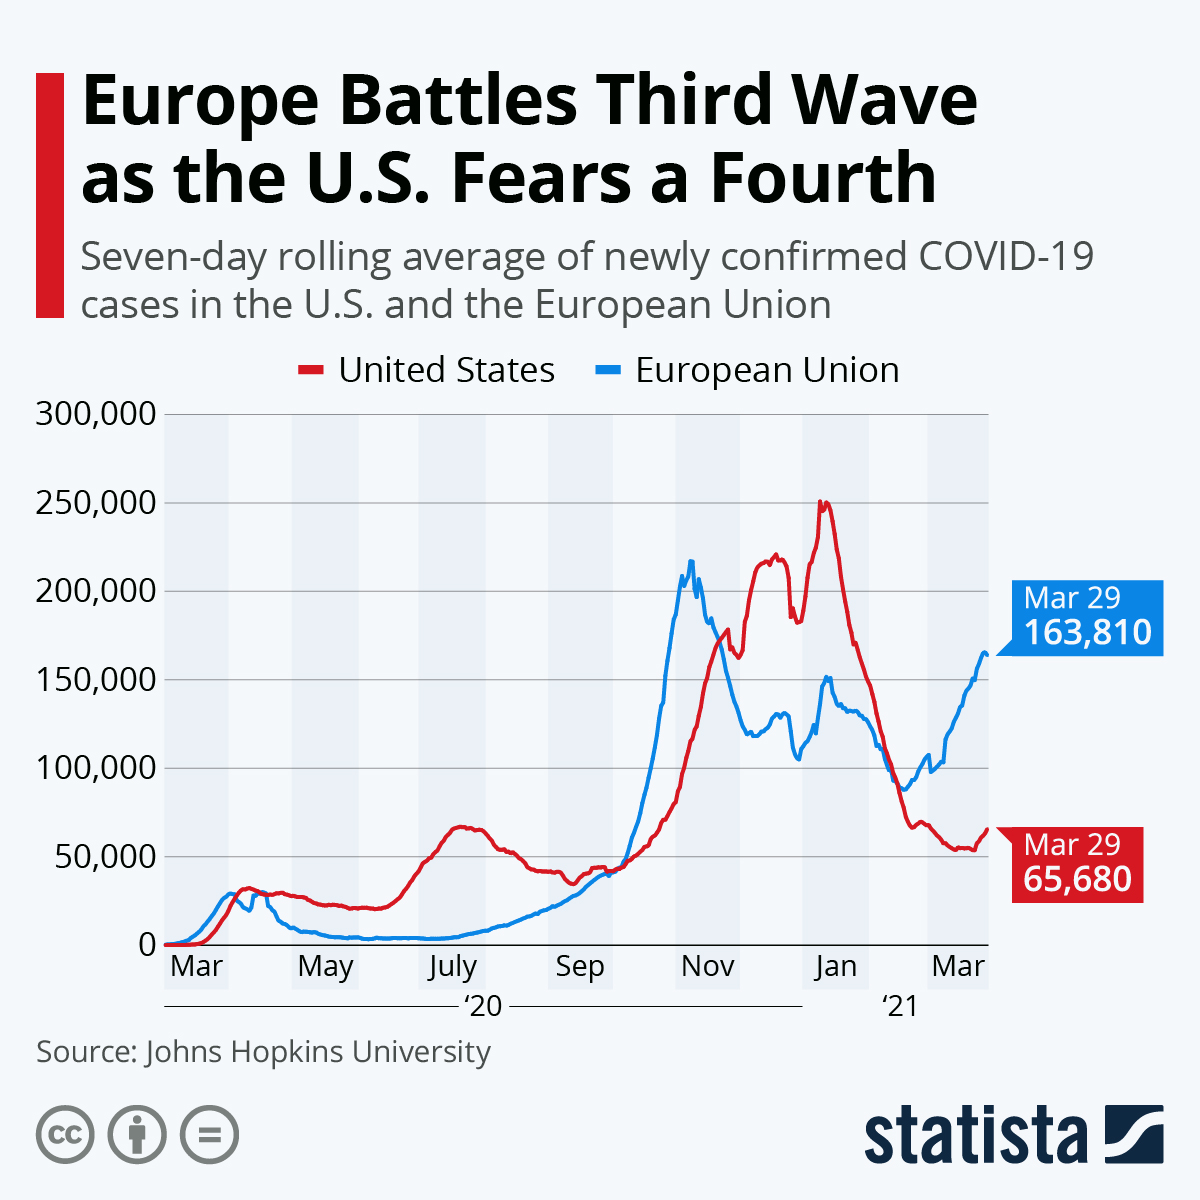 Europe Battles Third Wave as the U.S. Fears a Fourth